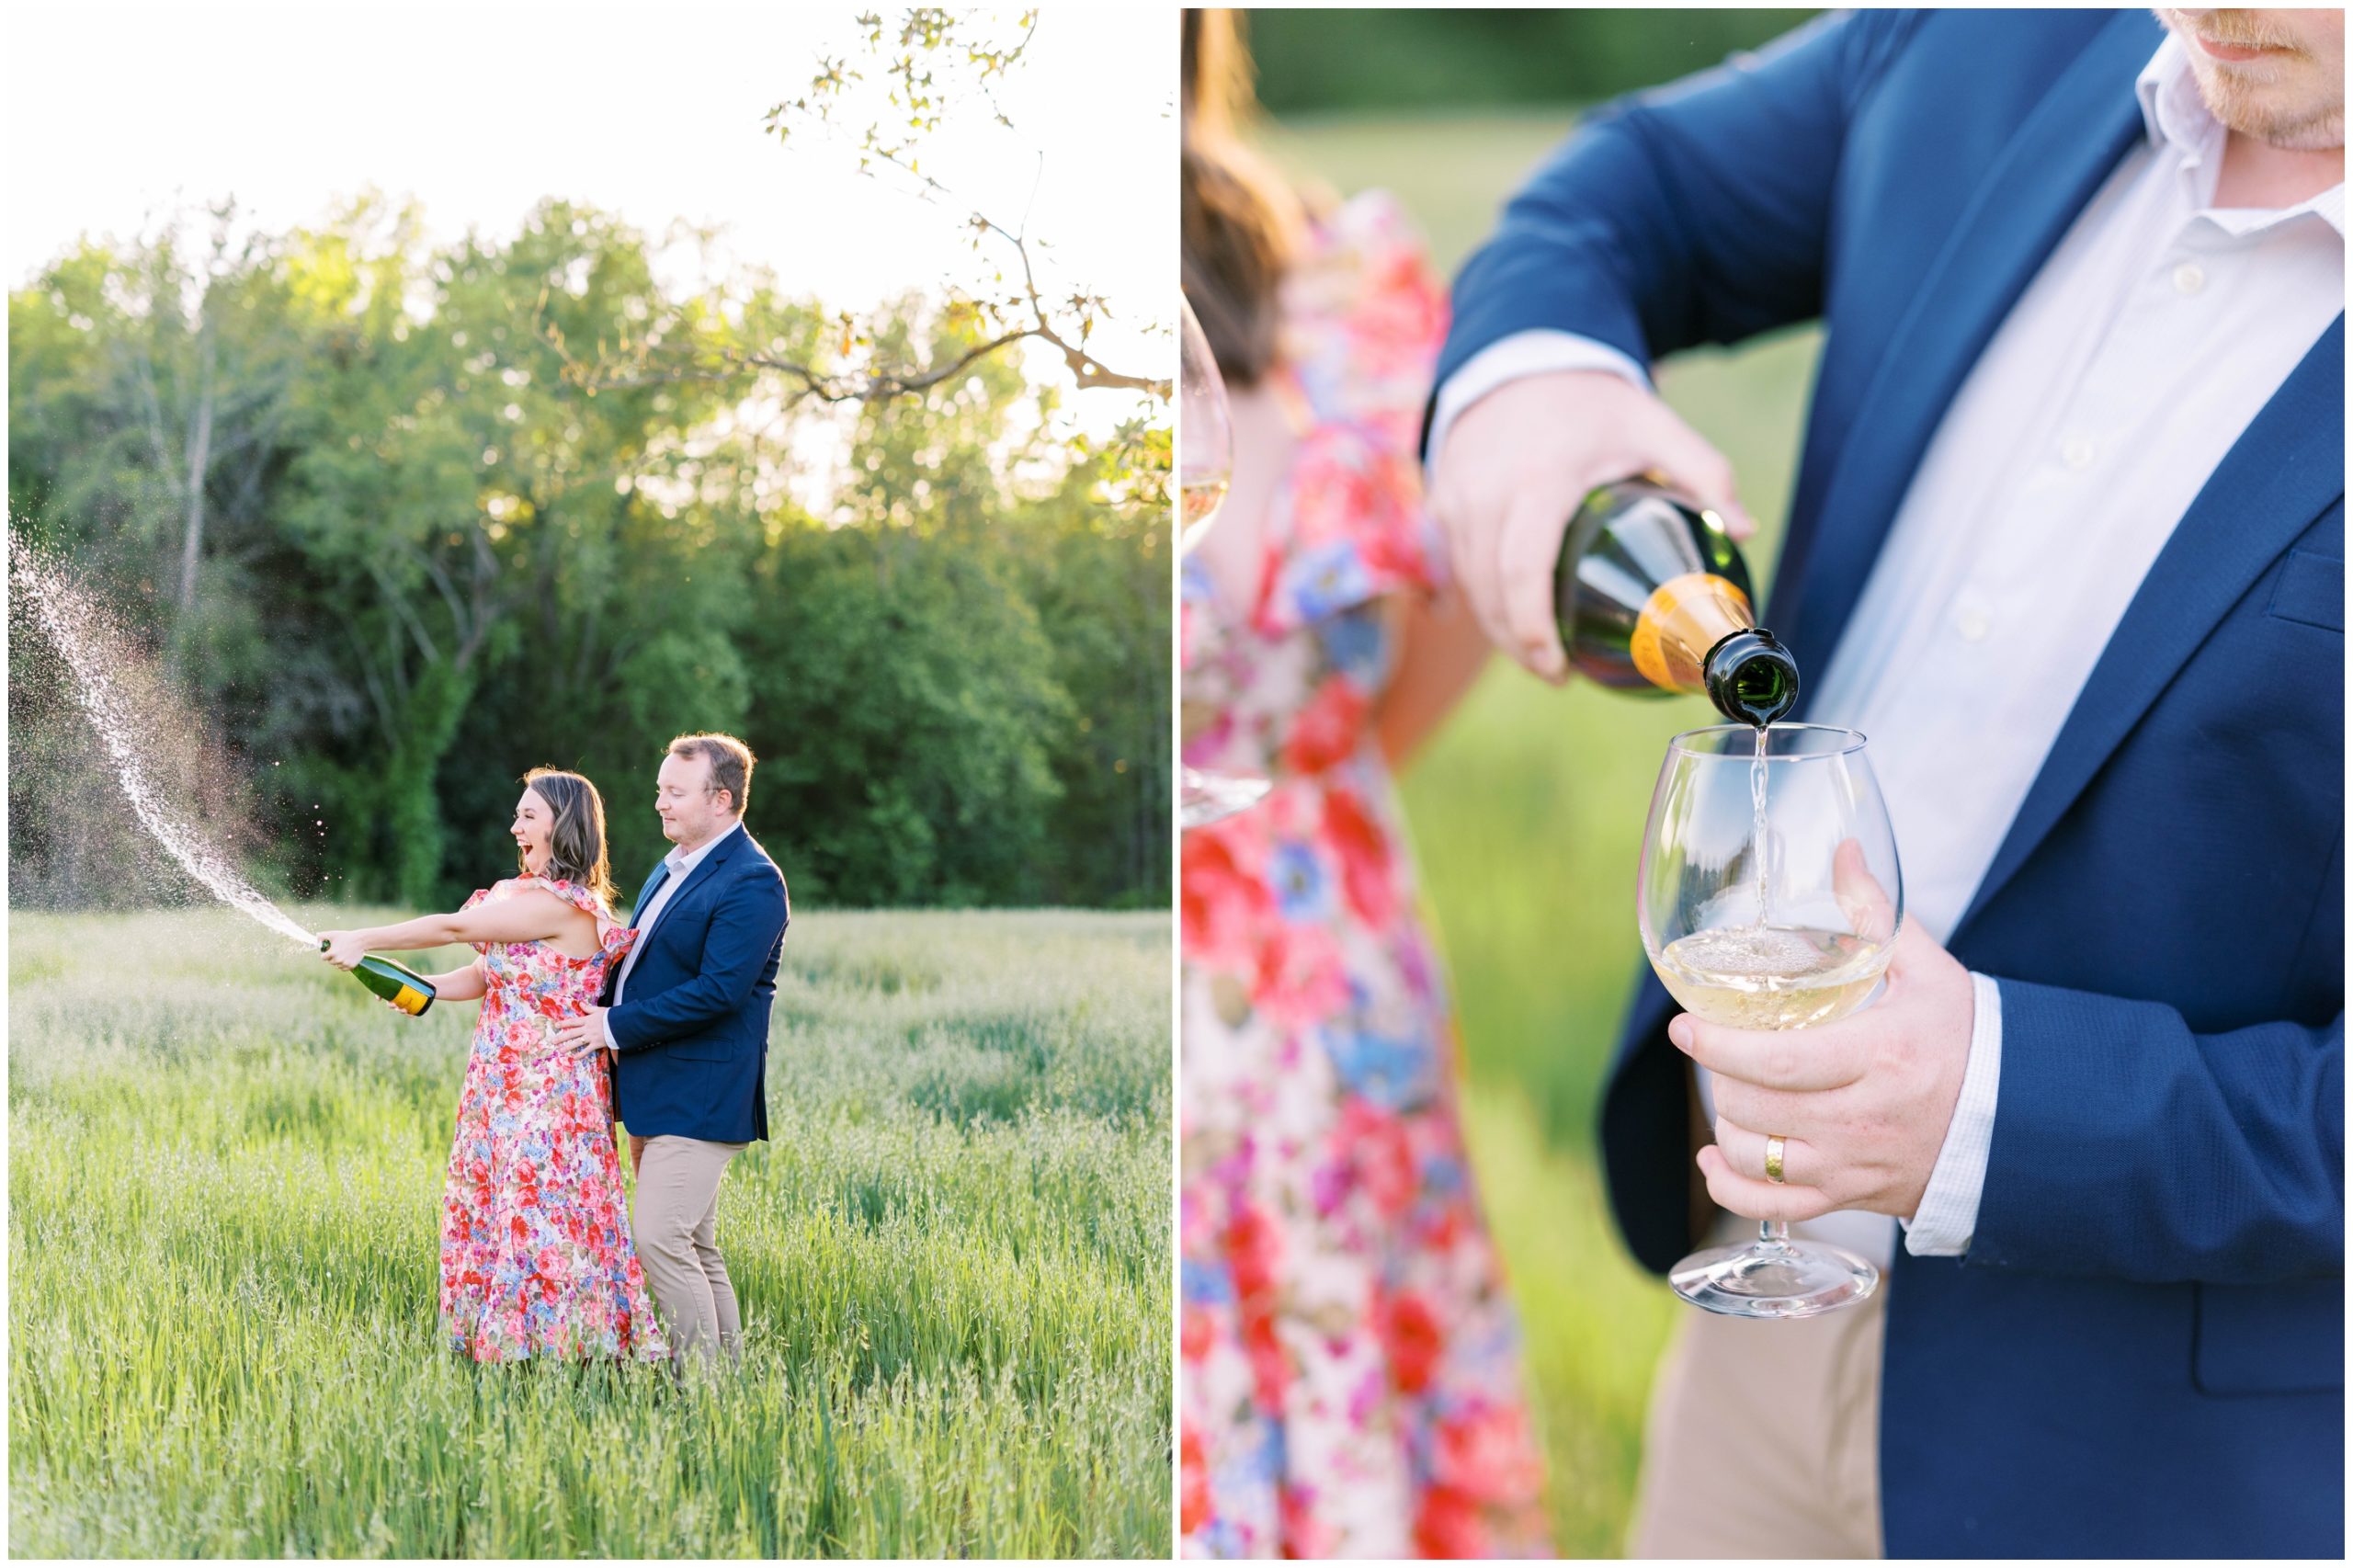 A couple popping a bottle of champagne during their engagement session